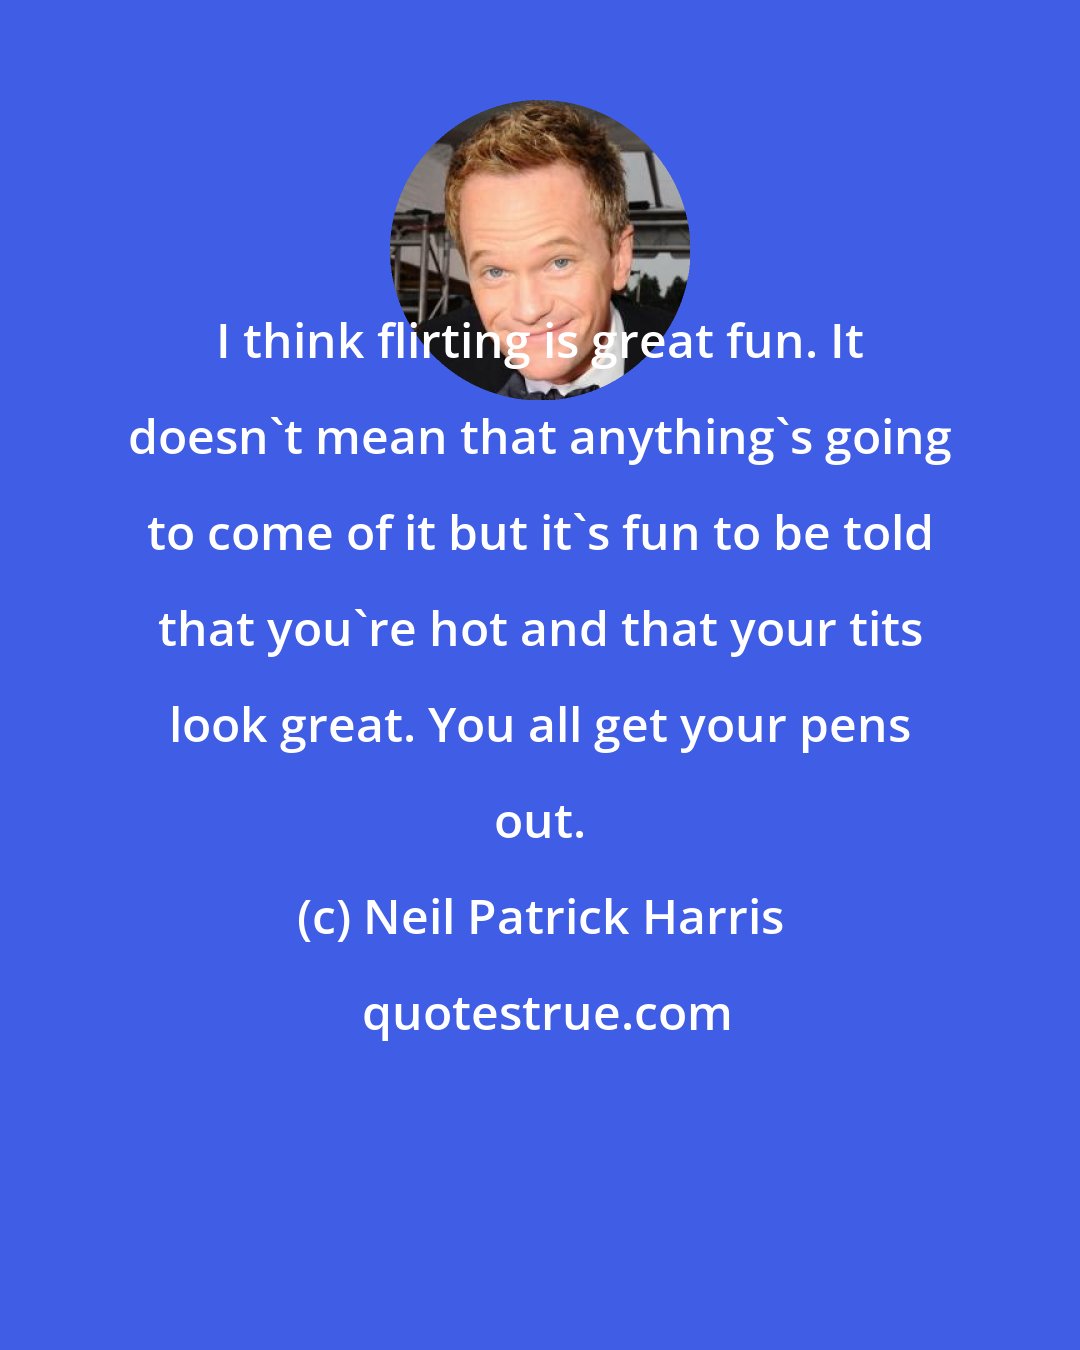 Neil Patrick Harris: I think flirting is great fun. It doesn't mean that anything's going to come of it but it's fun to be told that you're hot and that your tits look great. You all get your pens out.